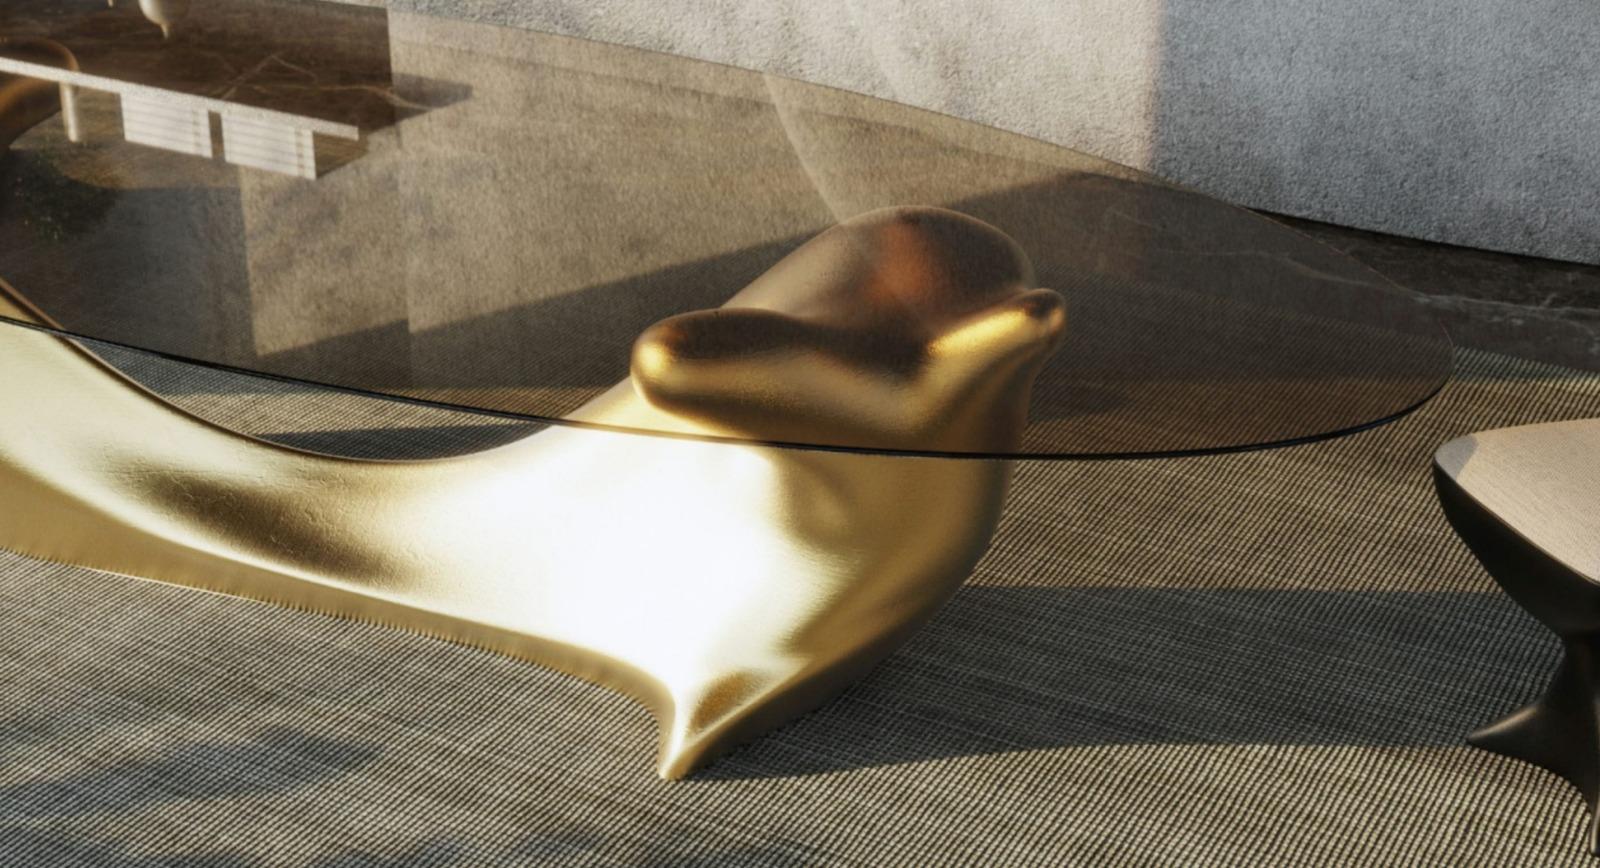 New Design DINING TABLE  Gold Leaf Base, Bronze Glass Top

Dimensions:
350 x 140 x 75 cm
137.8 x 55.1 x 29.5 in
Seats:
10 to 12

A true statement piece that embodies grandeur and elegance. Featuring a large bronze glass top, this table commands